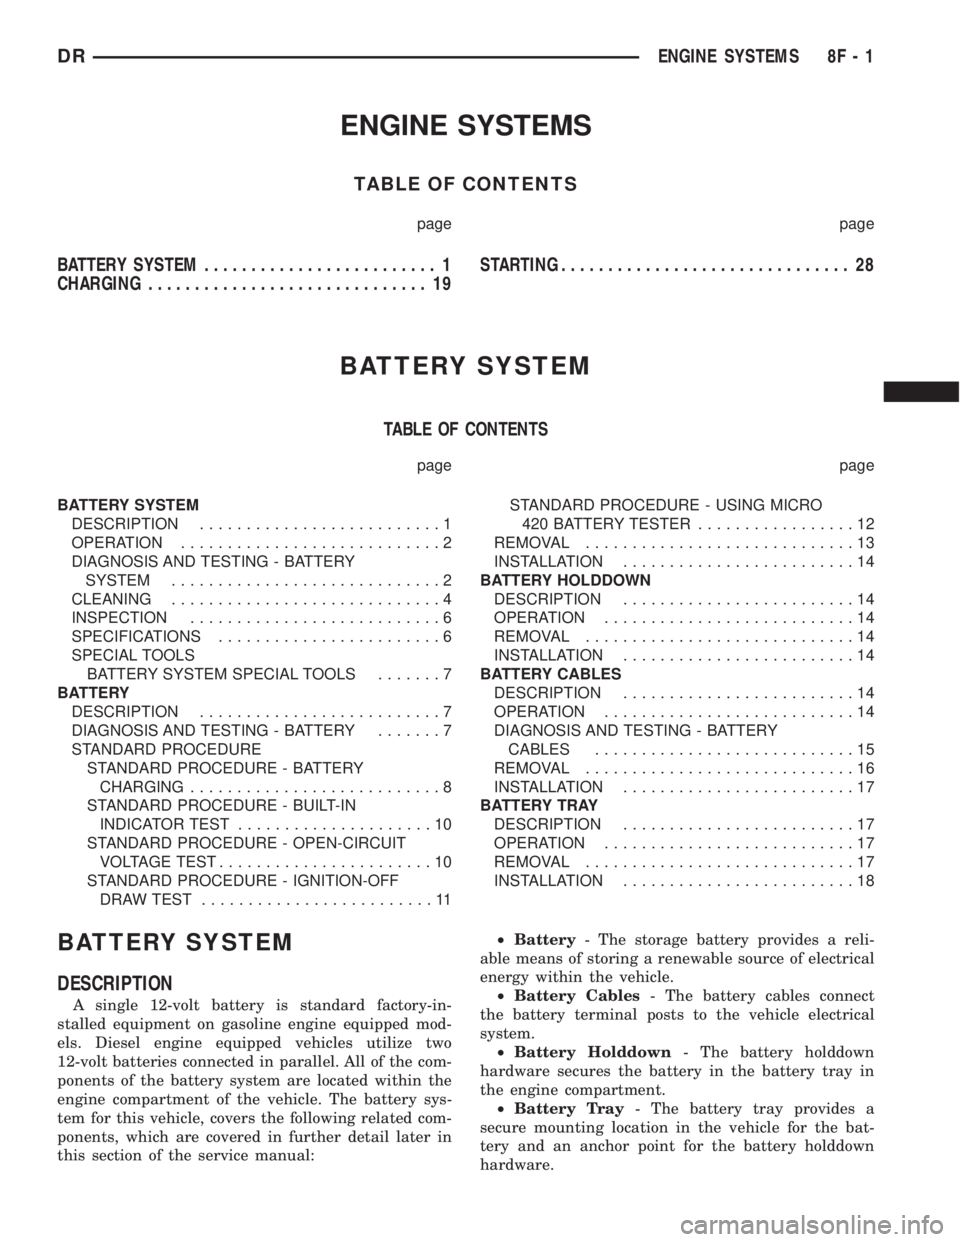 DODGE RAM 2003  Service Repair Manual ENGINE SYSTEMS
TABLE OF CONTENTS
page page
BATTERY SYSTEM......................... 1
CHARGING.............................. 19STARTING............................... 28
BATTERY SYSTEM
TABLE OF CONTENT